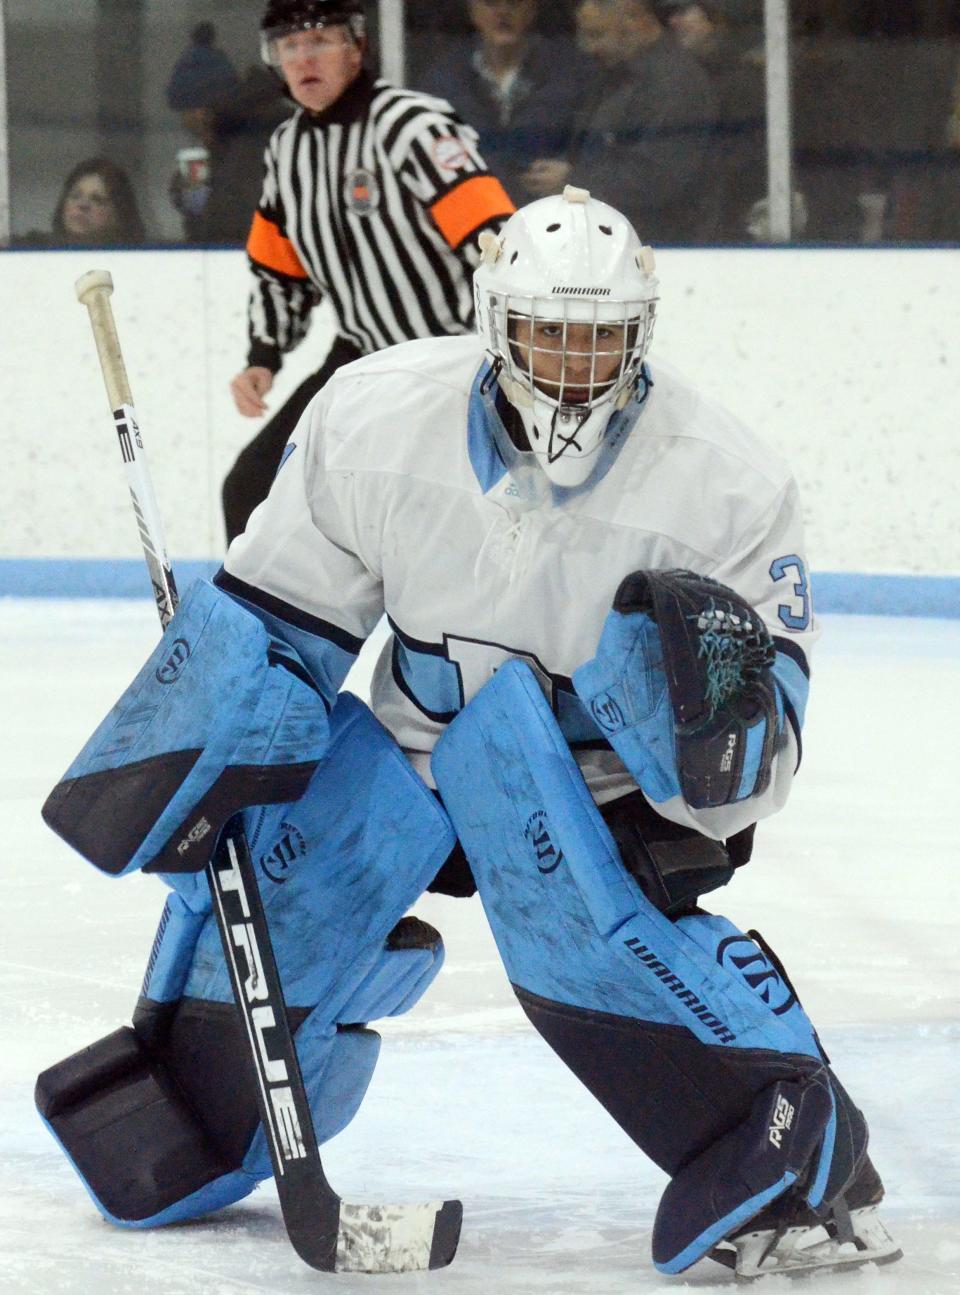 Petoskey goalie Joseph Wolfe watches play up against the boards during the second period.